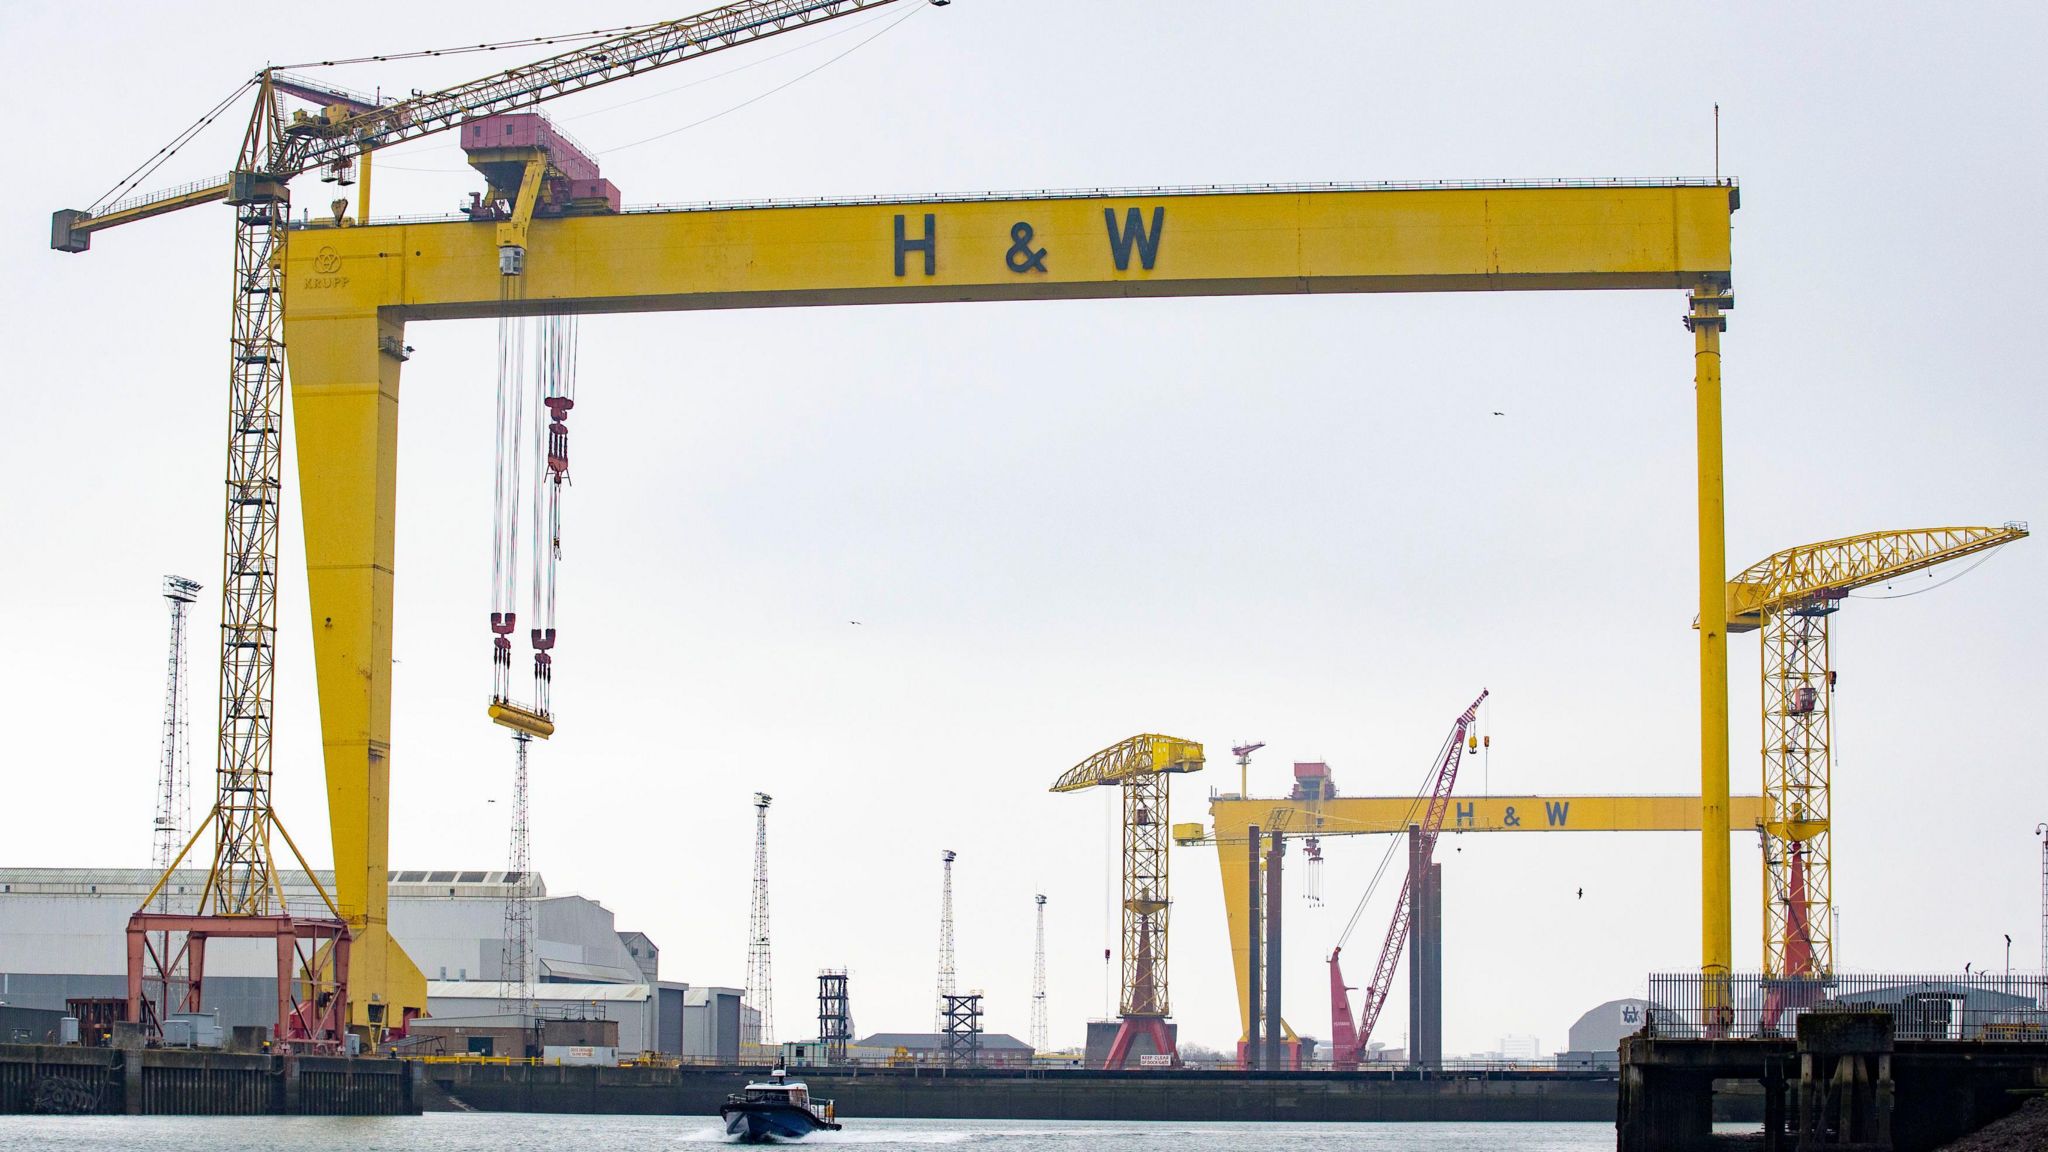 The yellow cranes of Harland and Wolff shipyard set against a grey sky